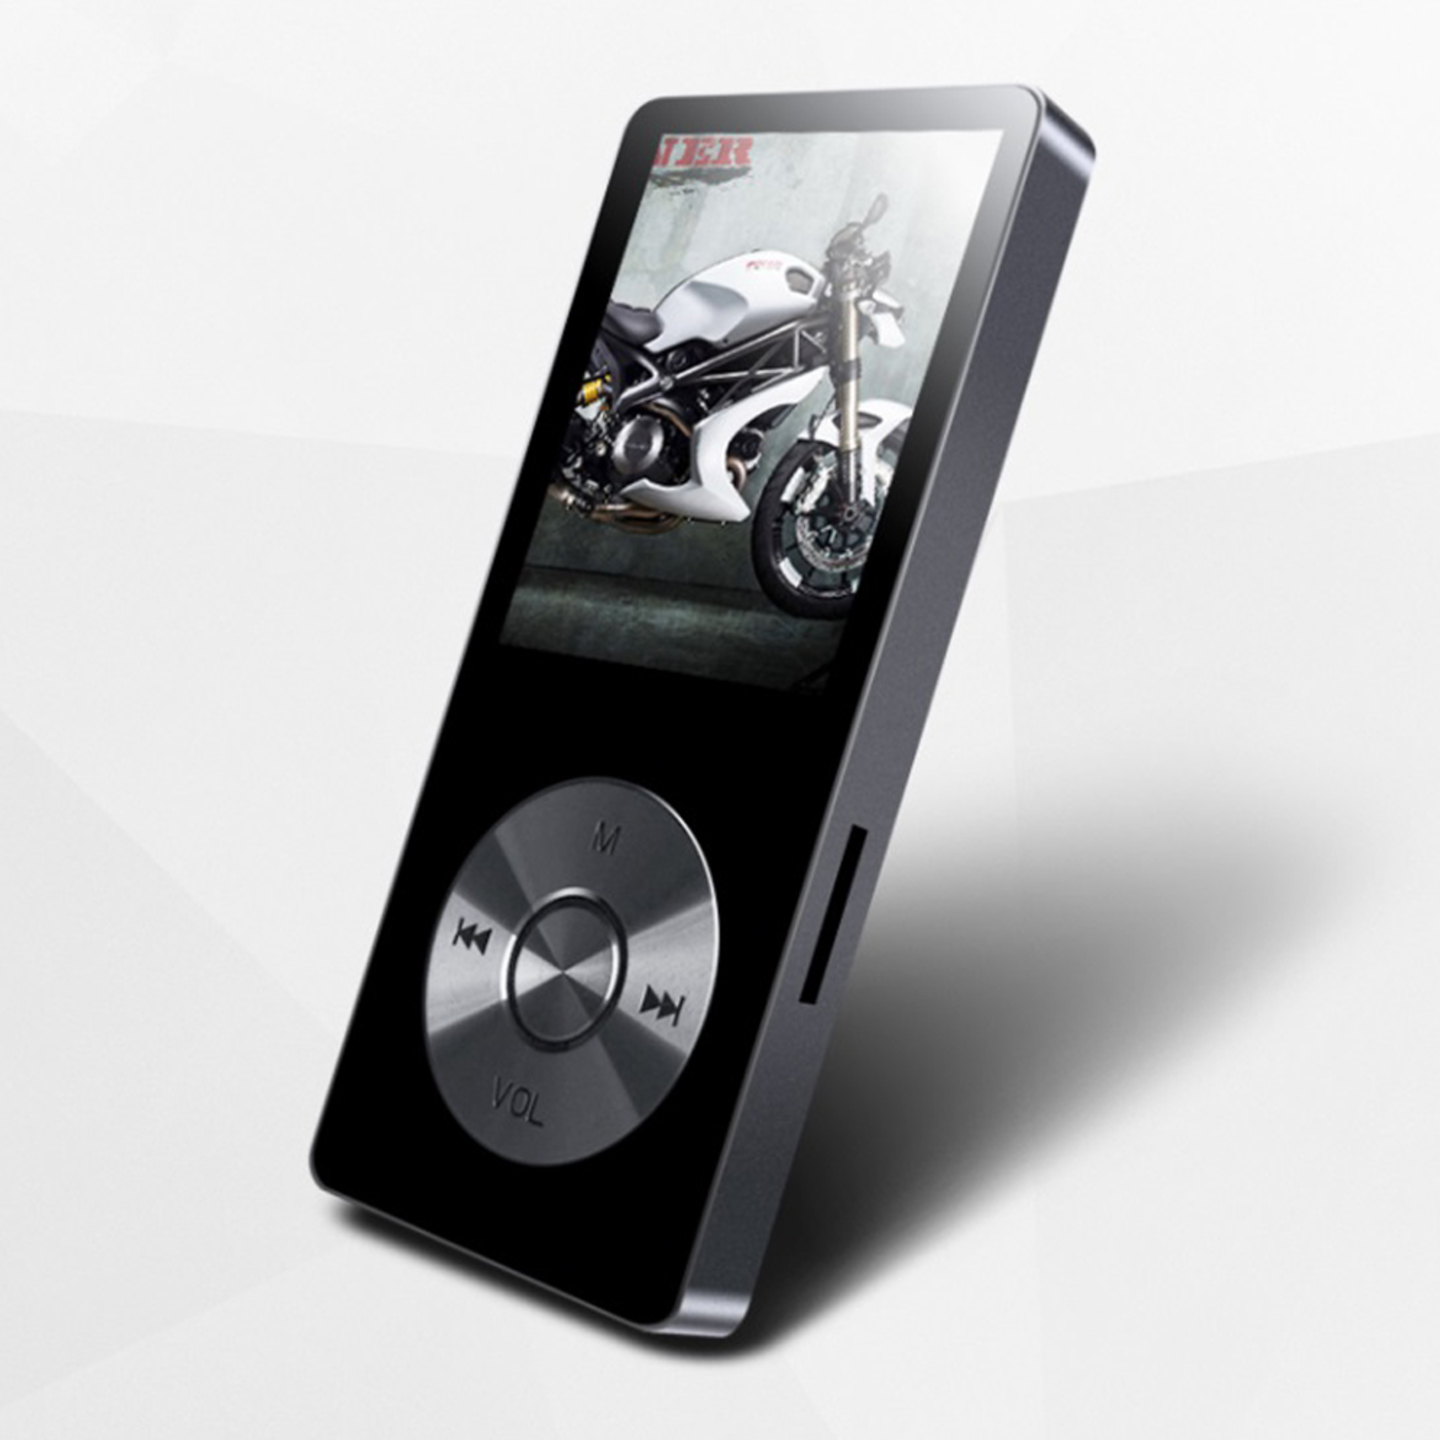 GoPlay K9 4/8GB Hi-fi Portable Audio Player (with speakers)